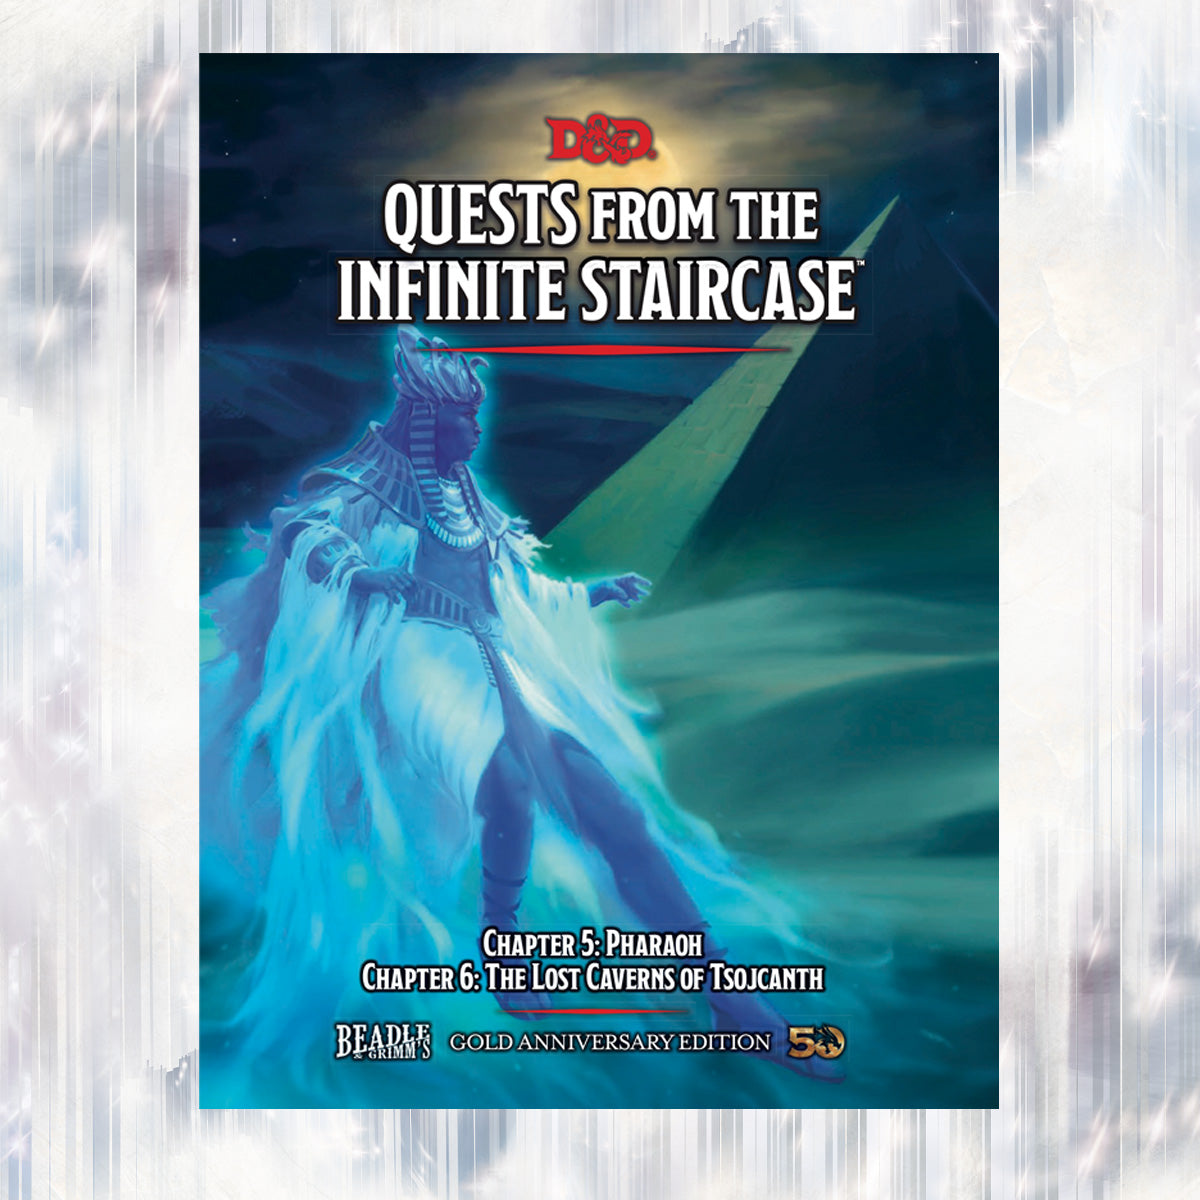 Gold Anniversary Edition of Quests from the Infinite Staircase